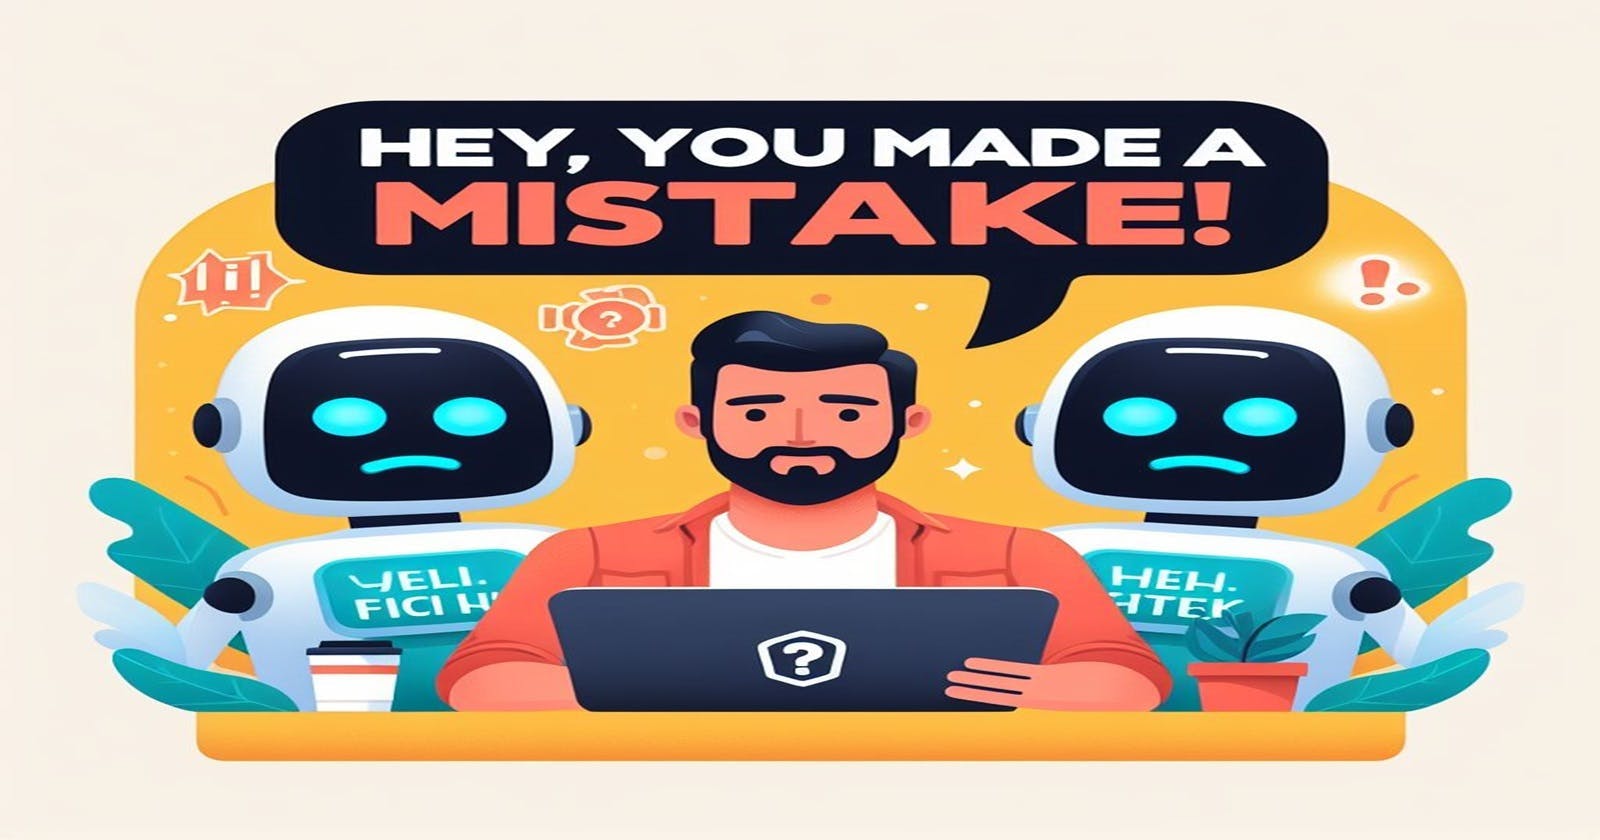 "Hey, You Made a Mistake!": Coaching AI Agents with Verbal Feedback